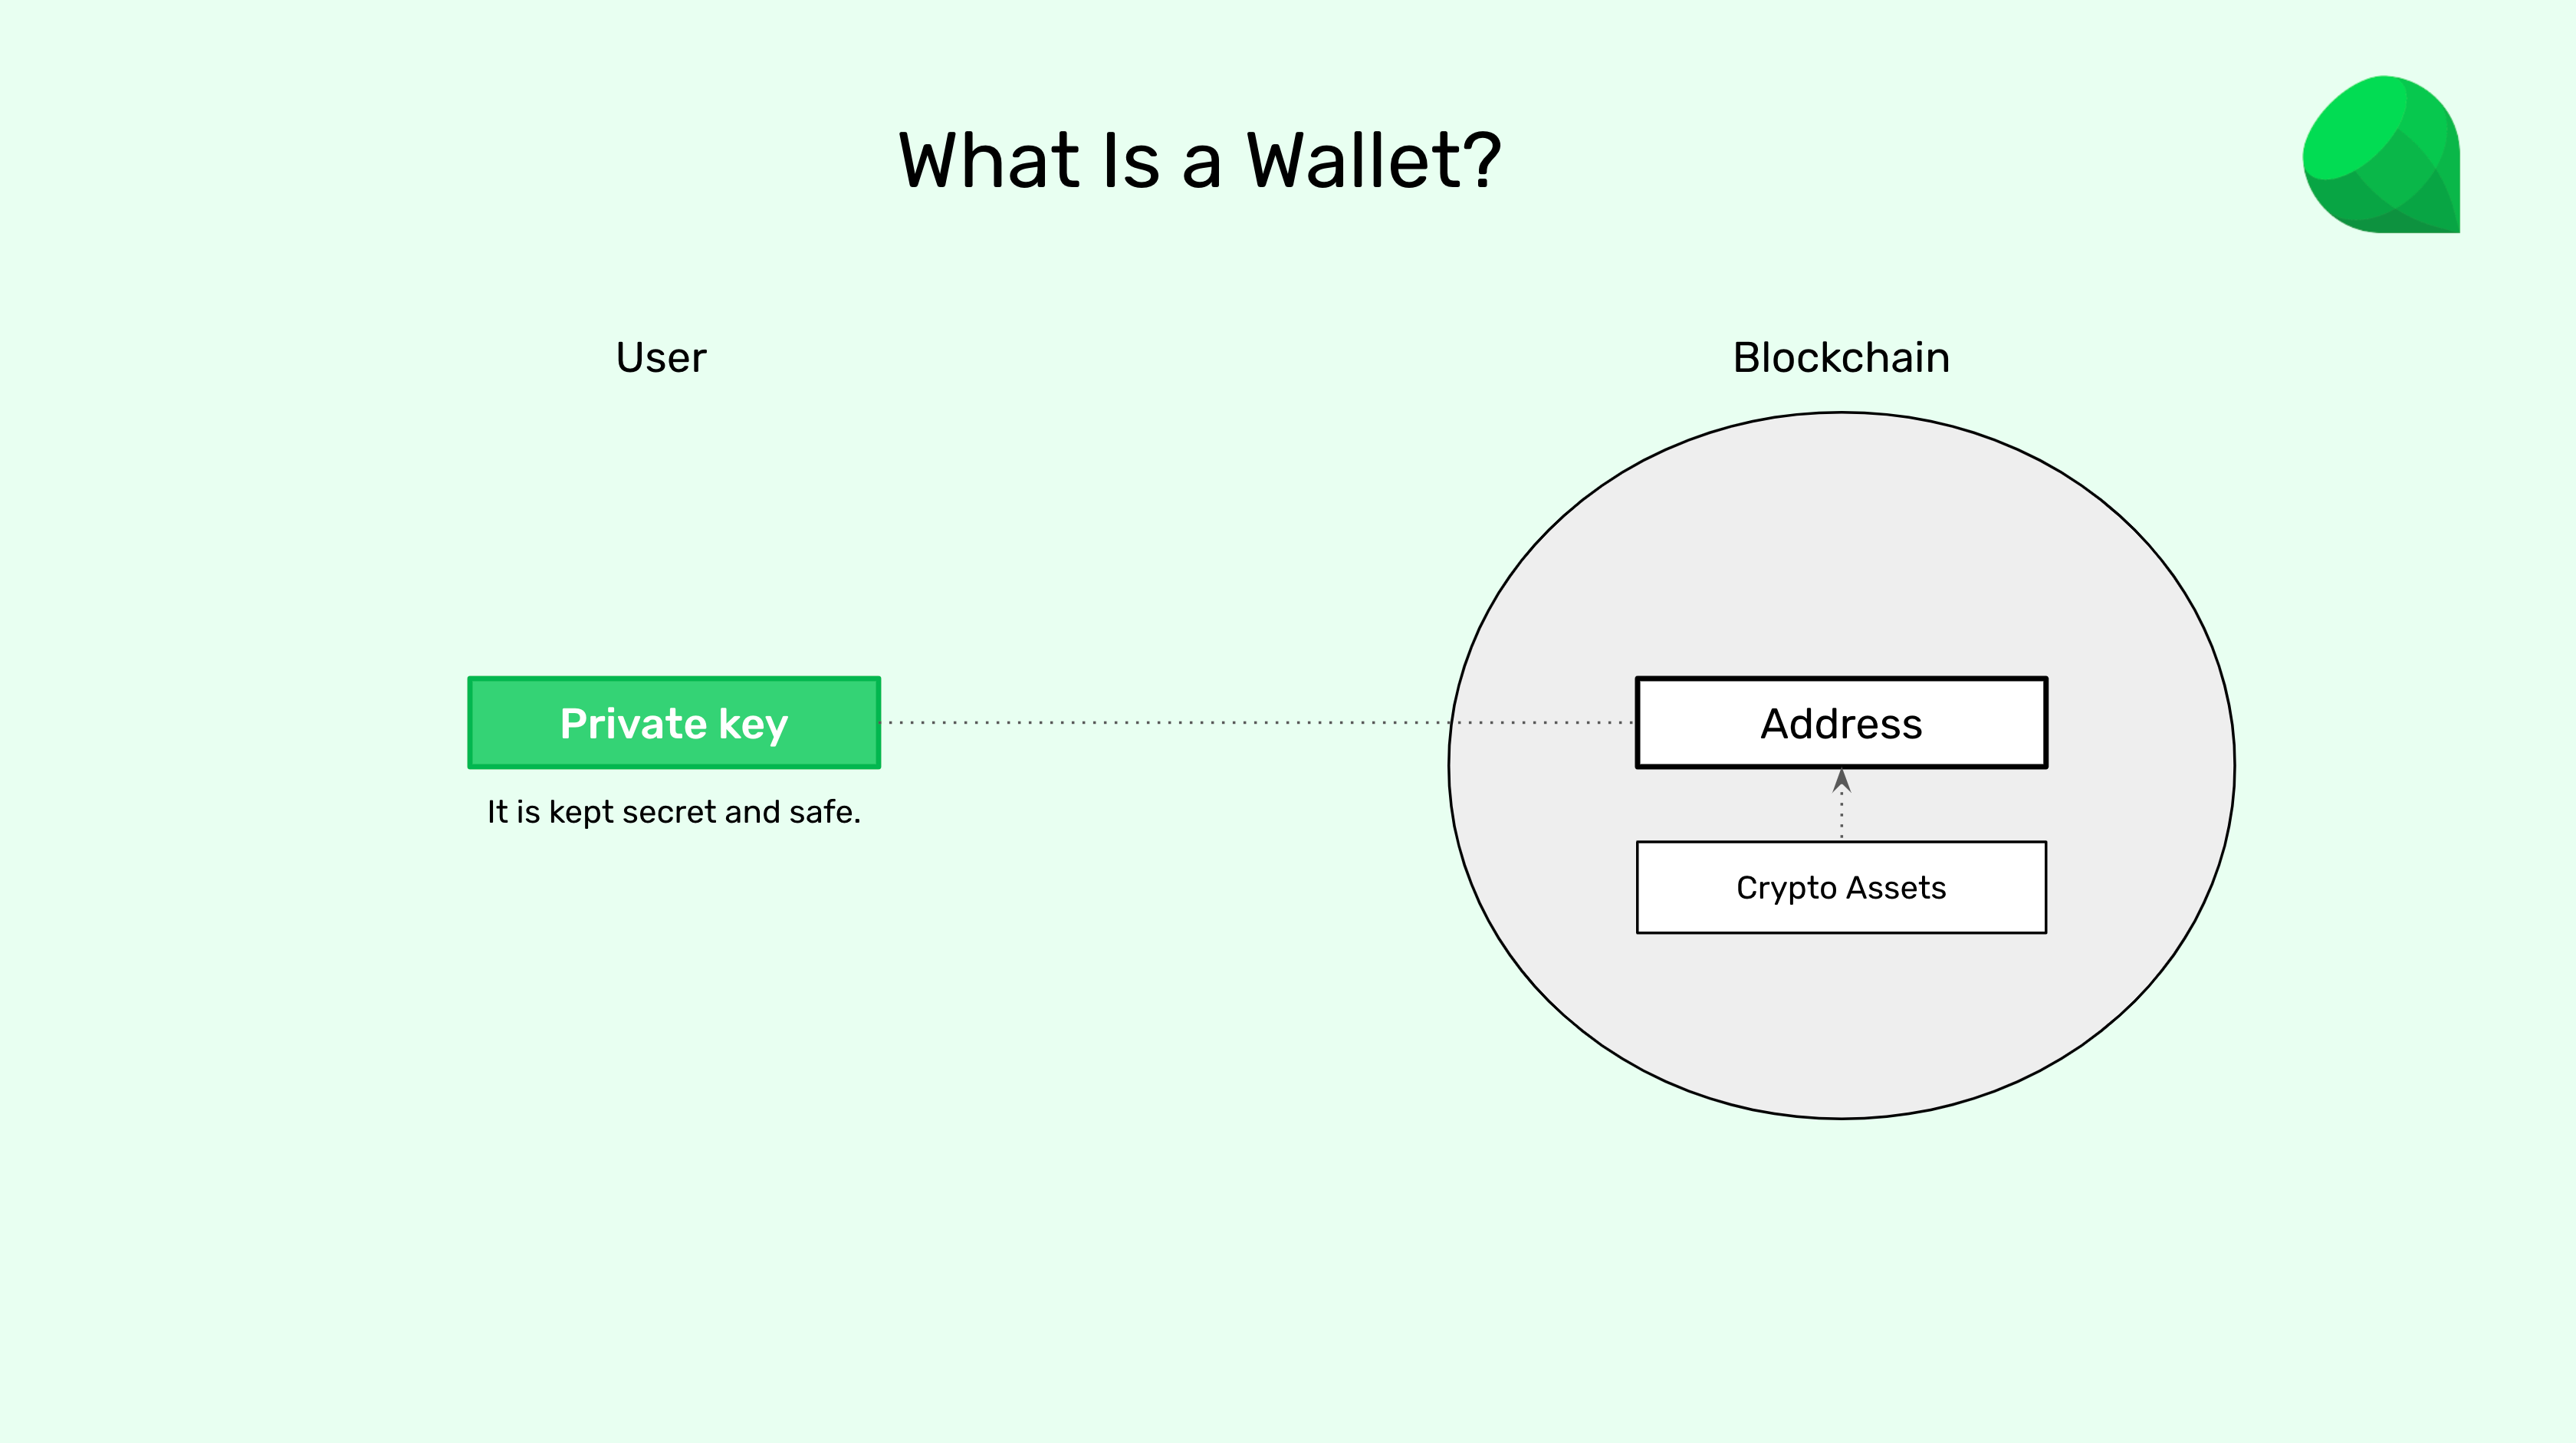 What is a wallet?